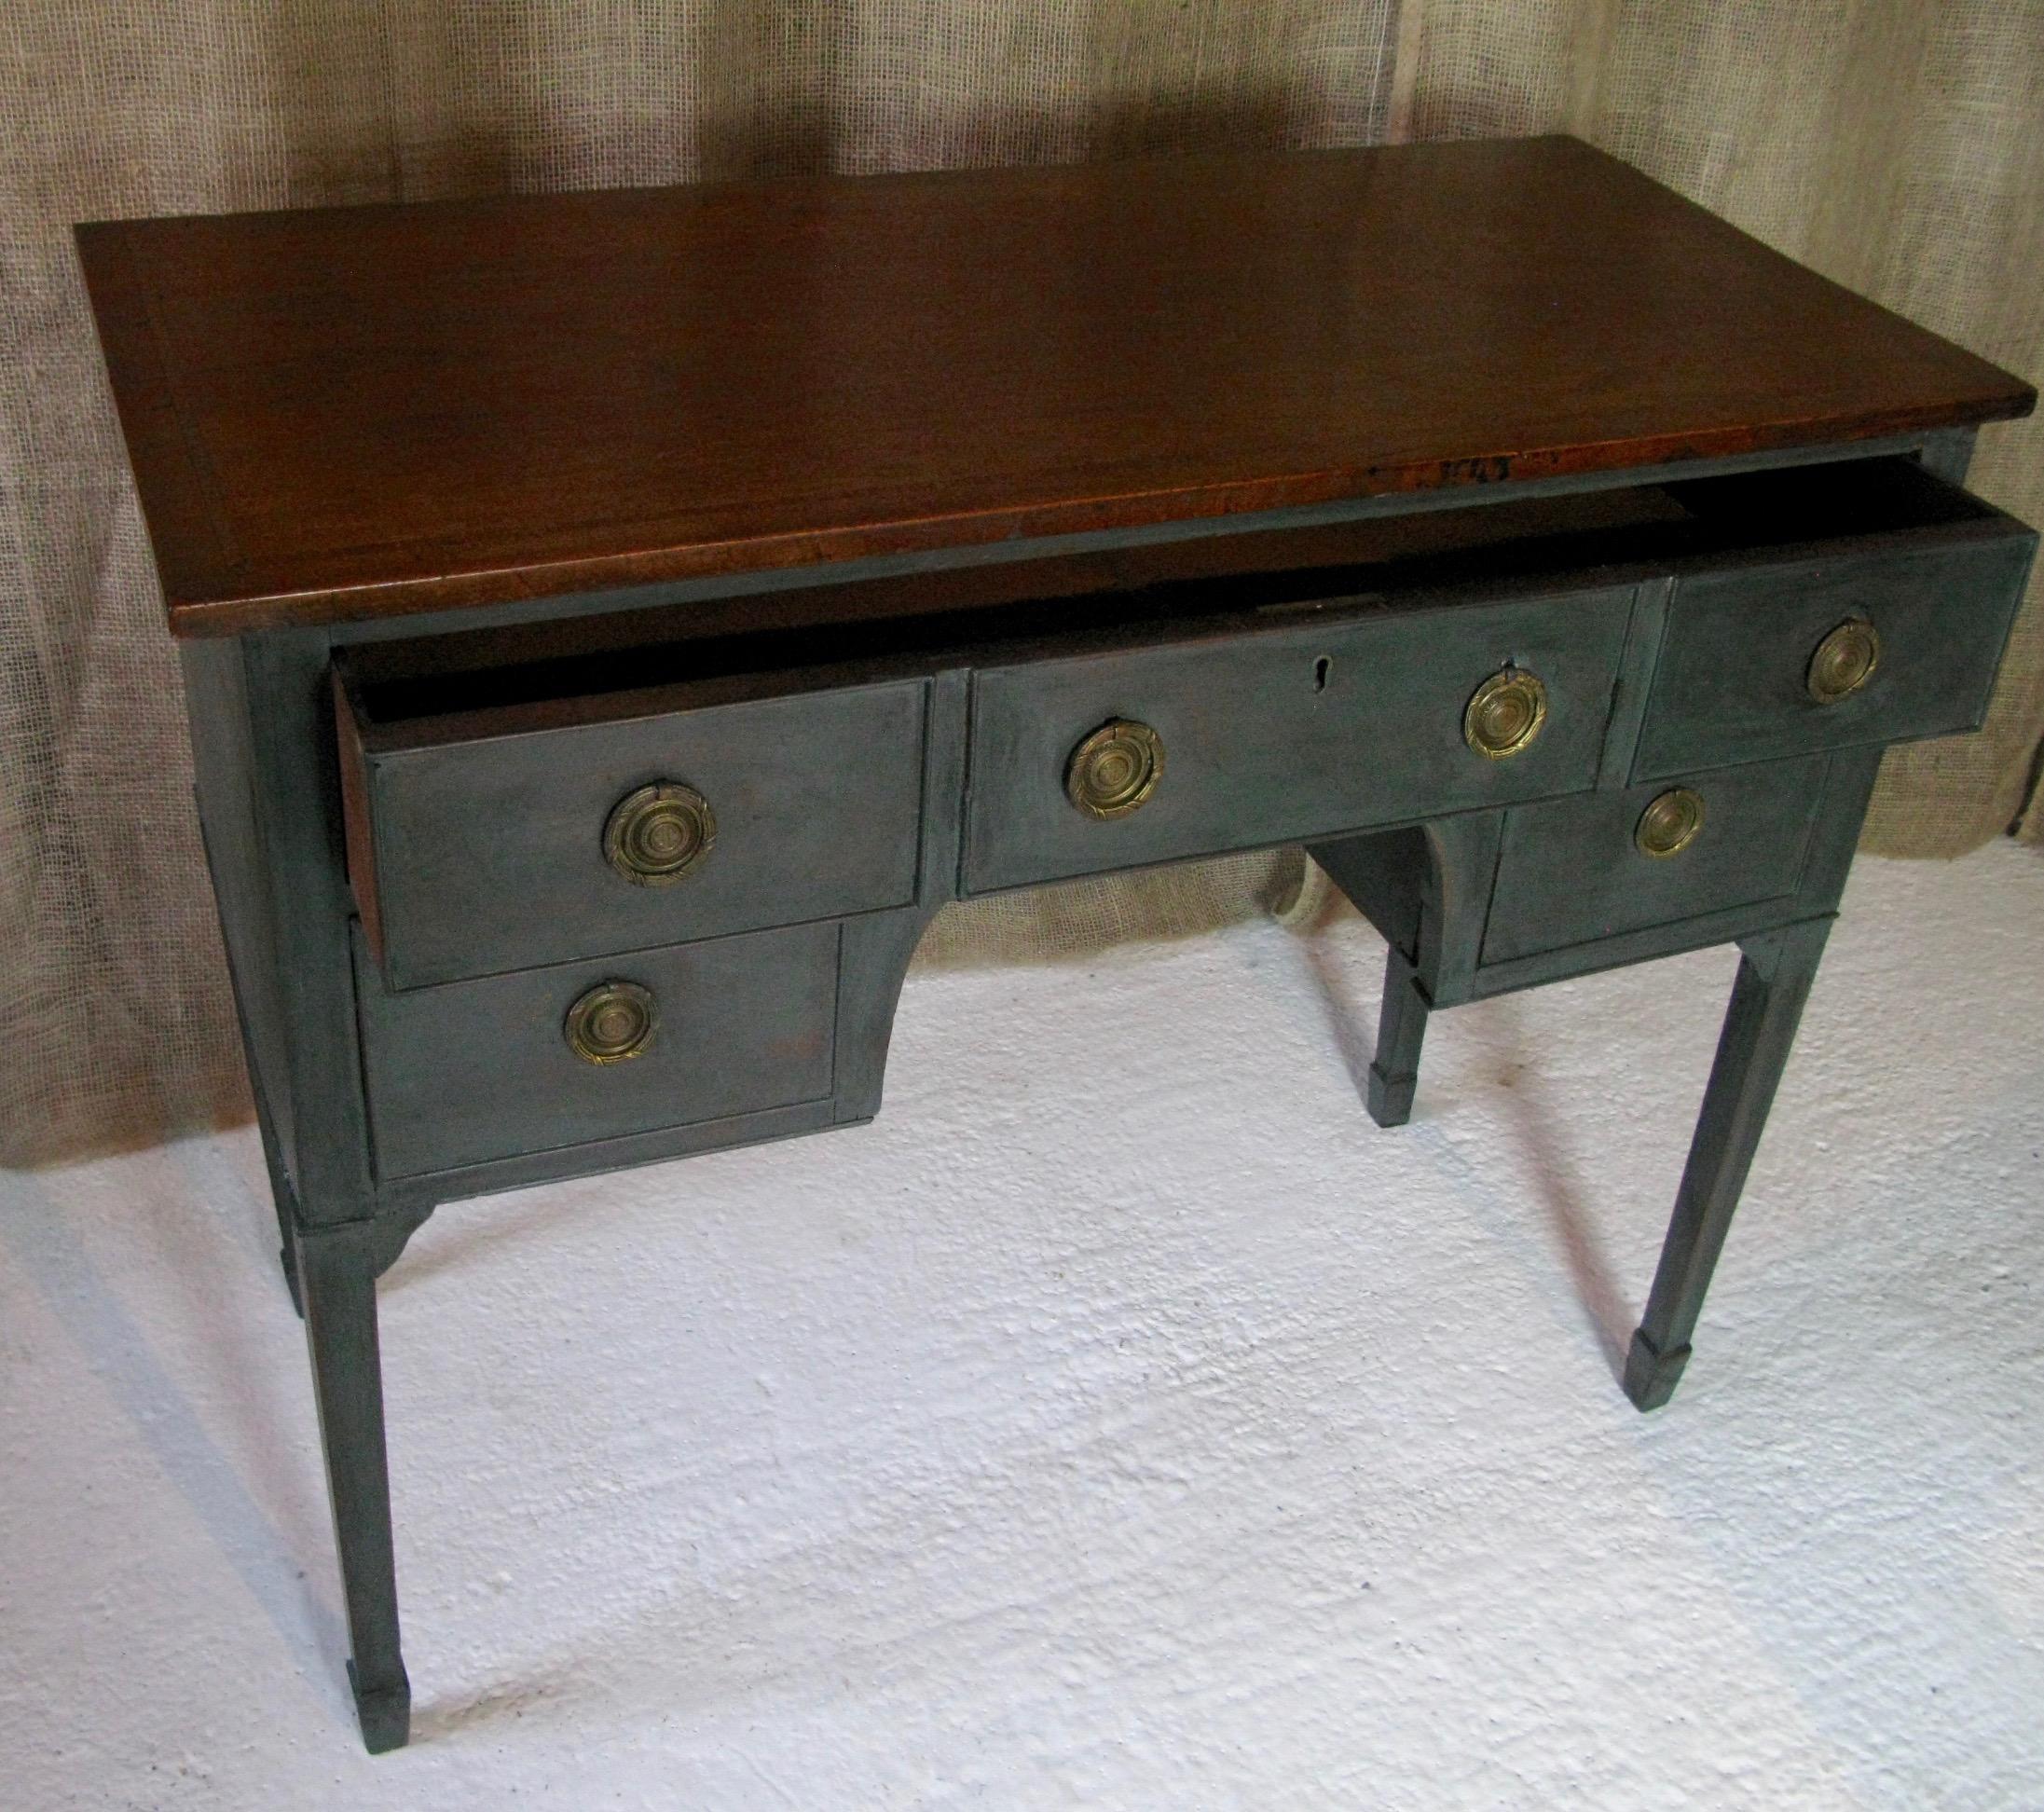 Cold-Painted Italian Style, Writing Table, Antique Small Writing Table, English Writing Table